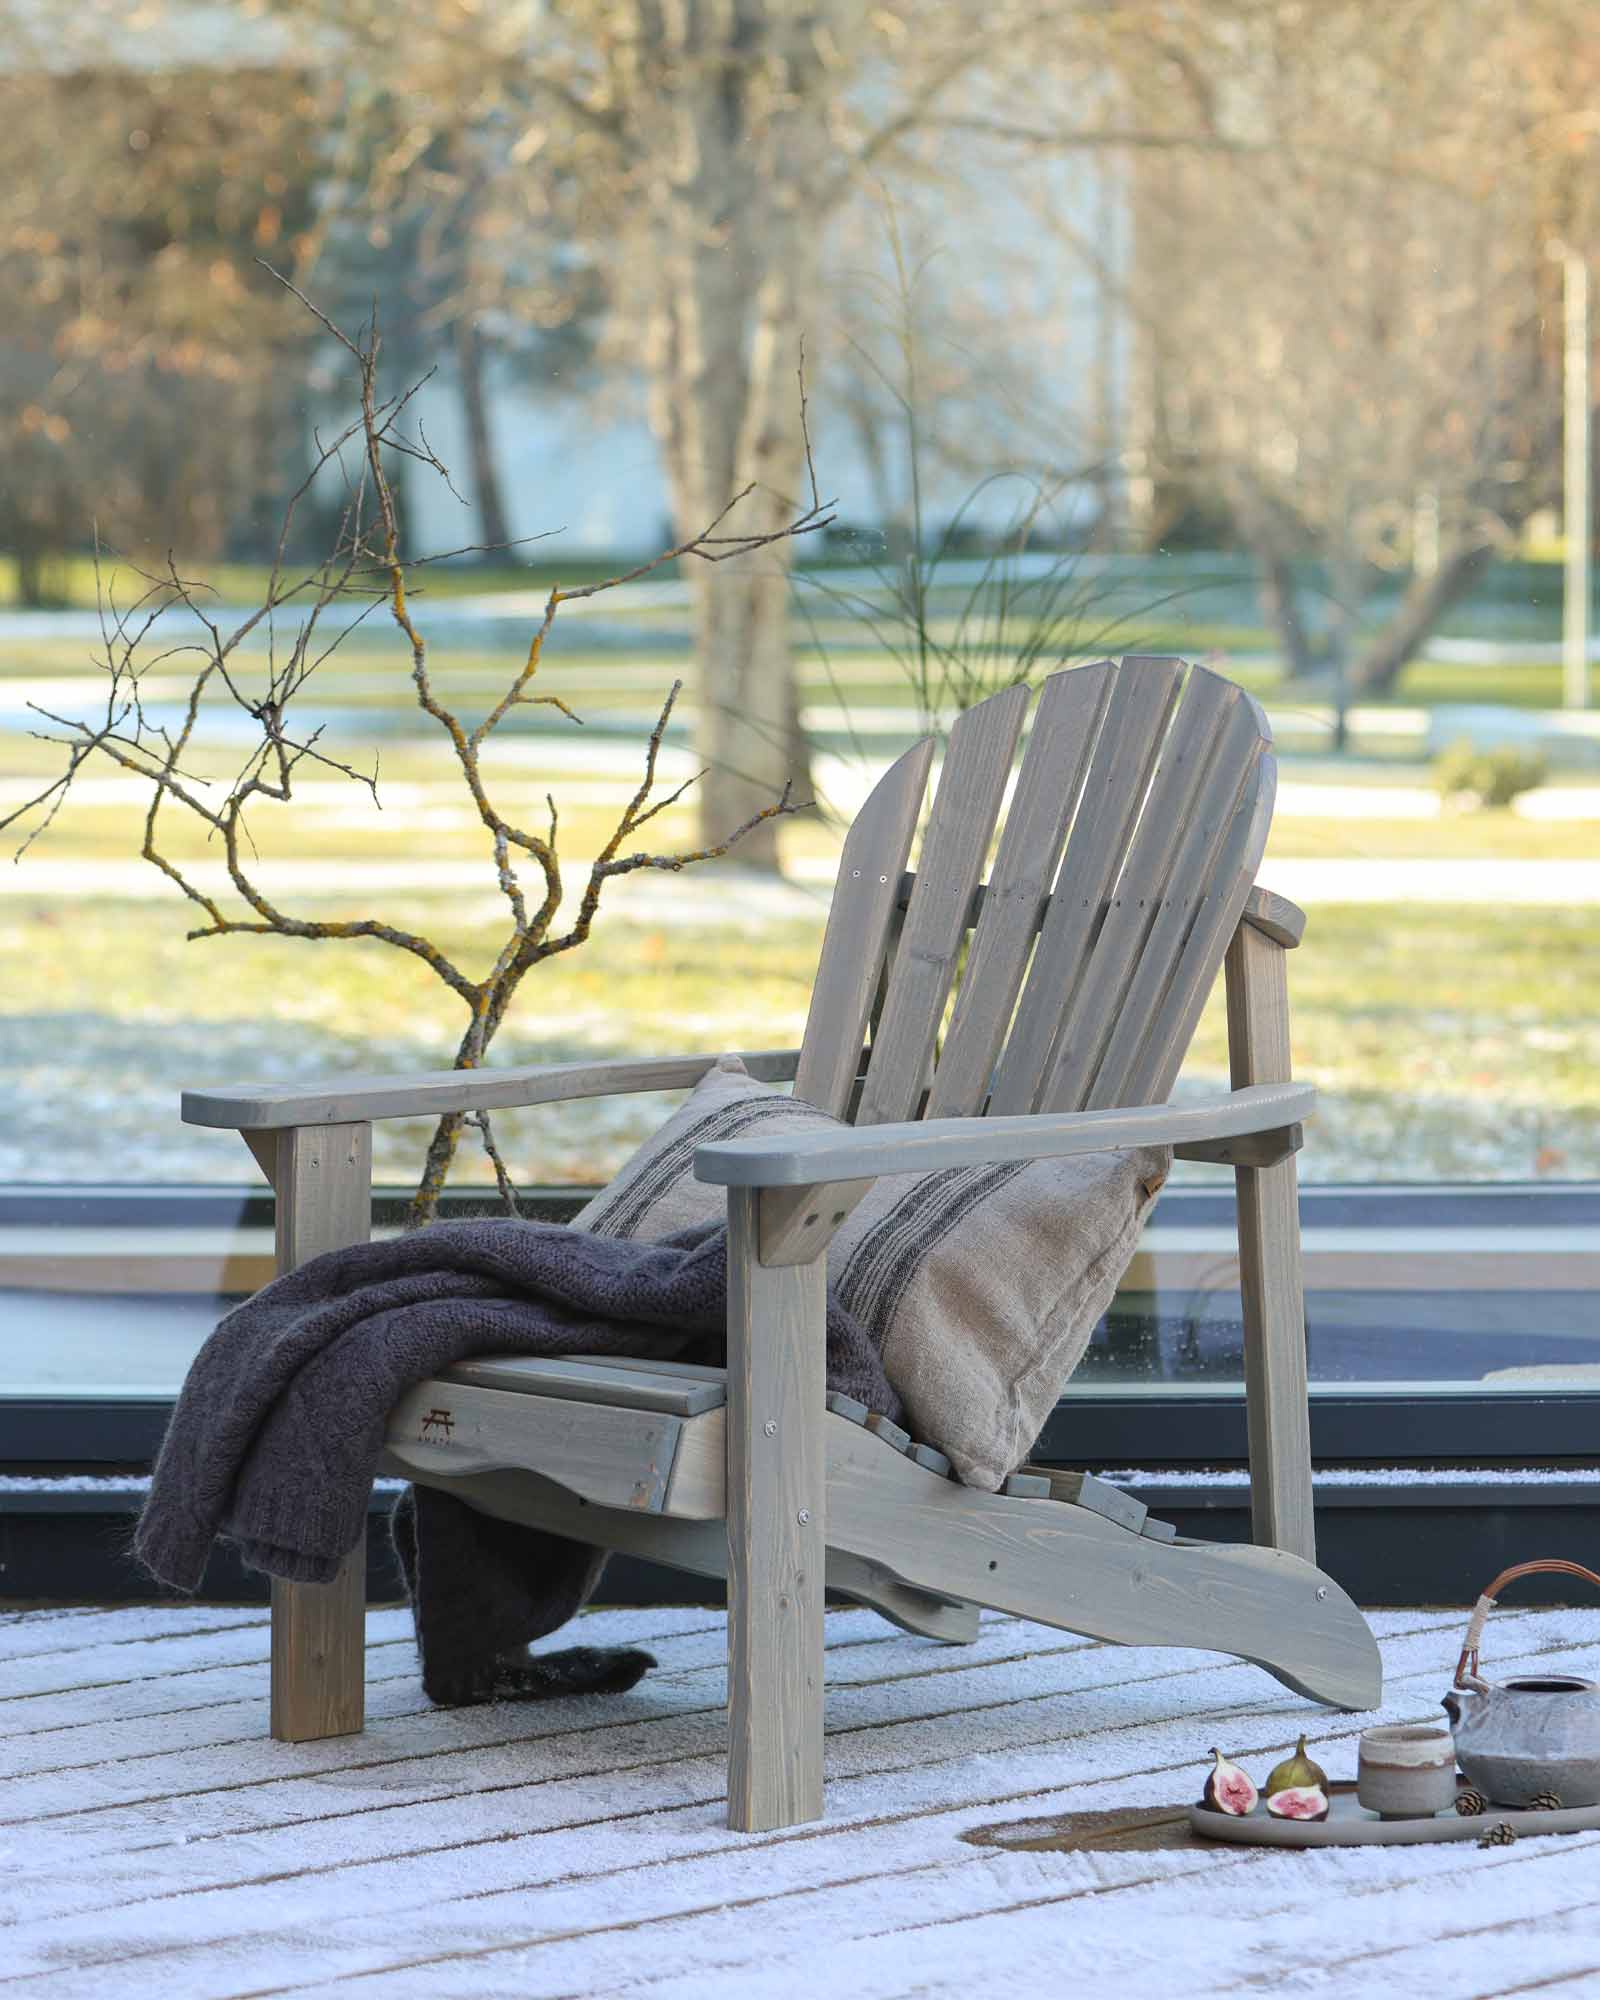 Grey wooden Adirondack chair with a decorative throw pillow and blanket on a snowy patio